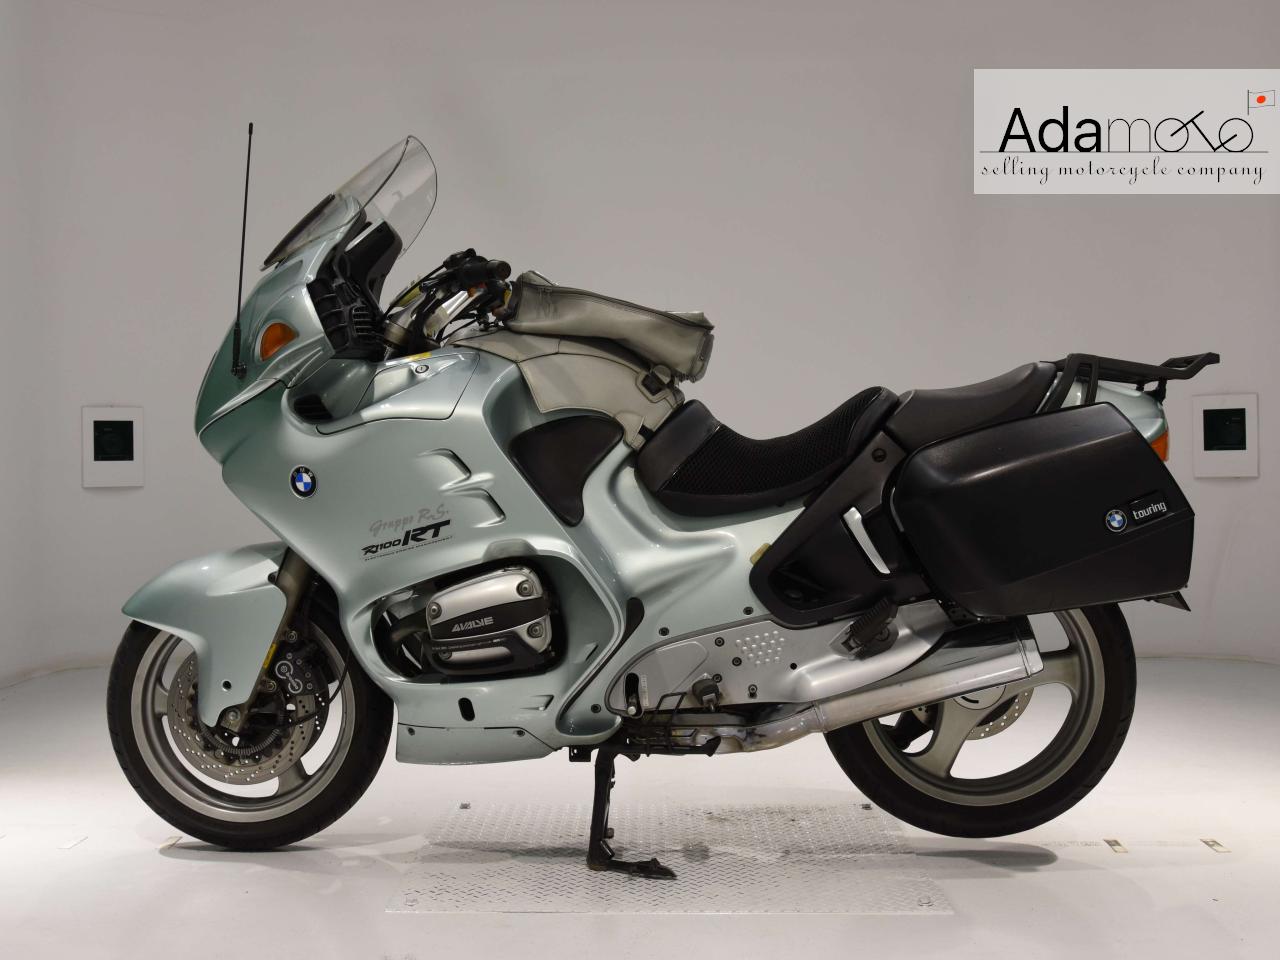 BMW R1100RT - Adamoto - Motorcycles from Japan